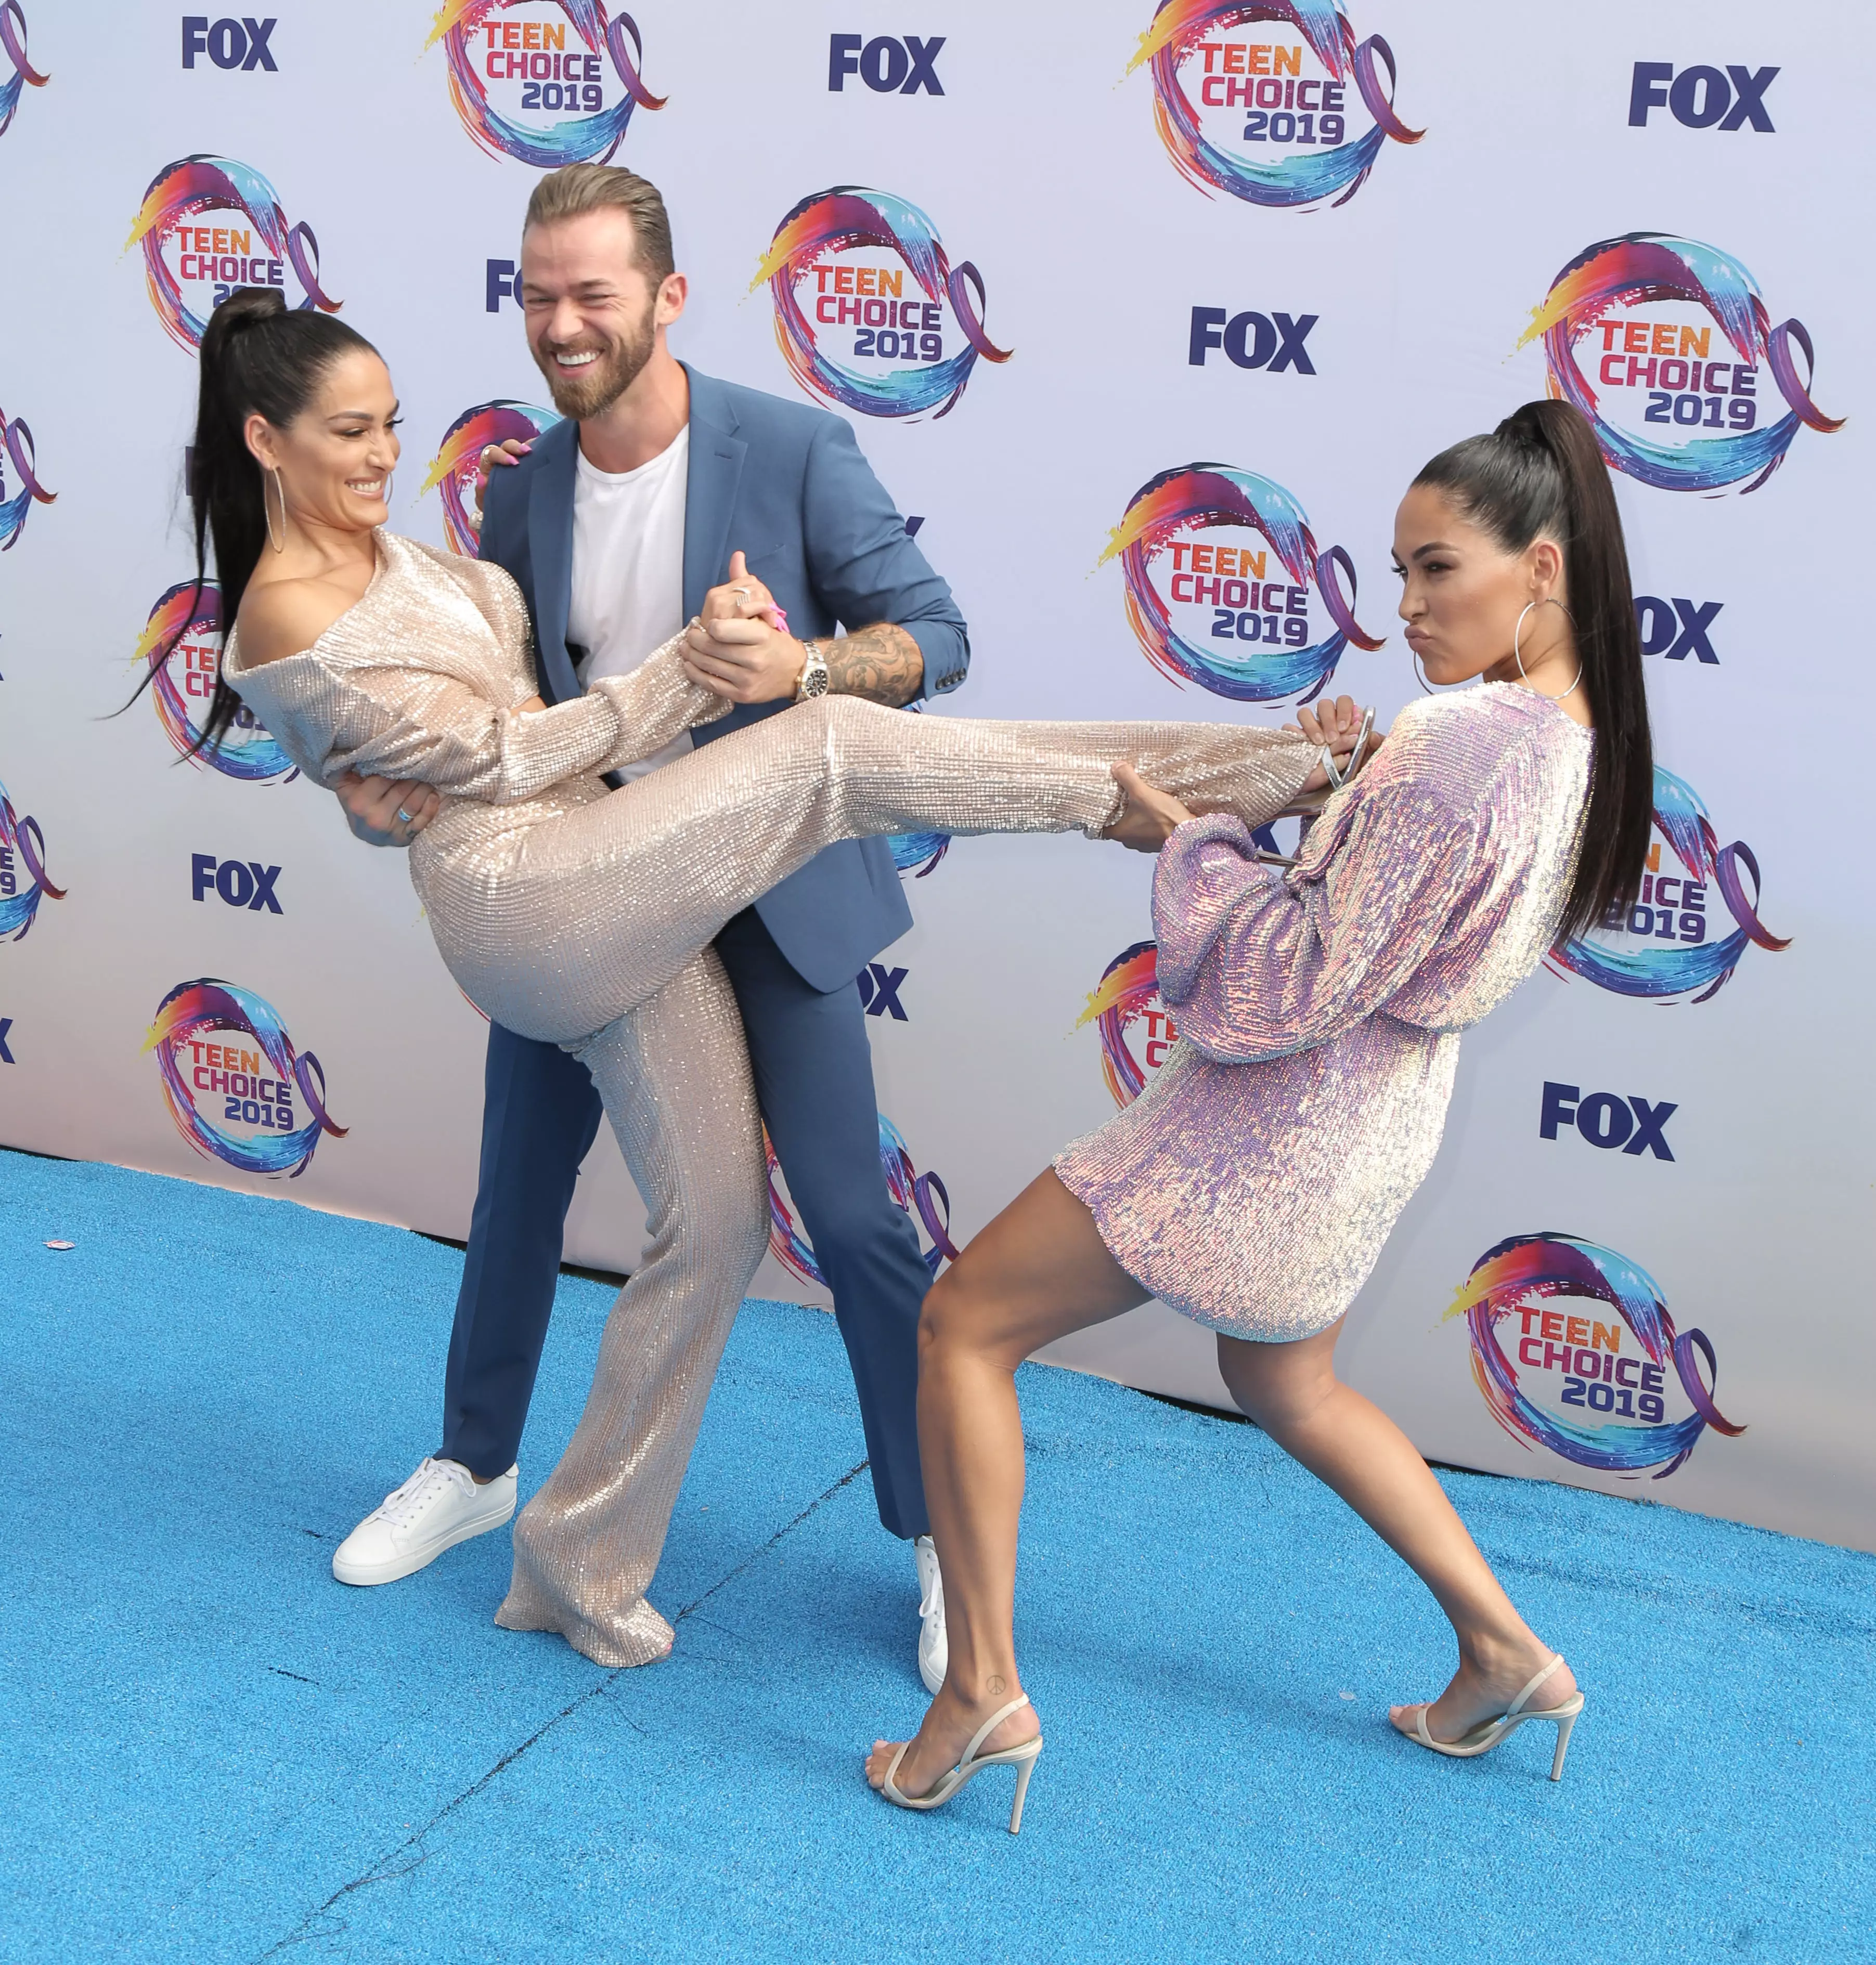 Nikki Bella, Brie Bella and Artem Chigvintsev at the Teen Choice Awards in 2019.